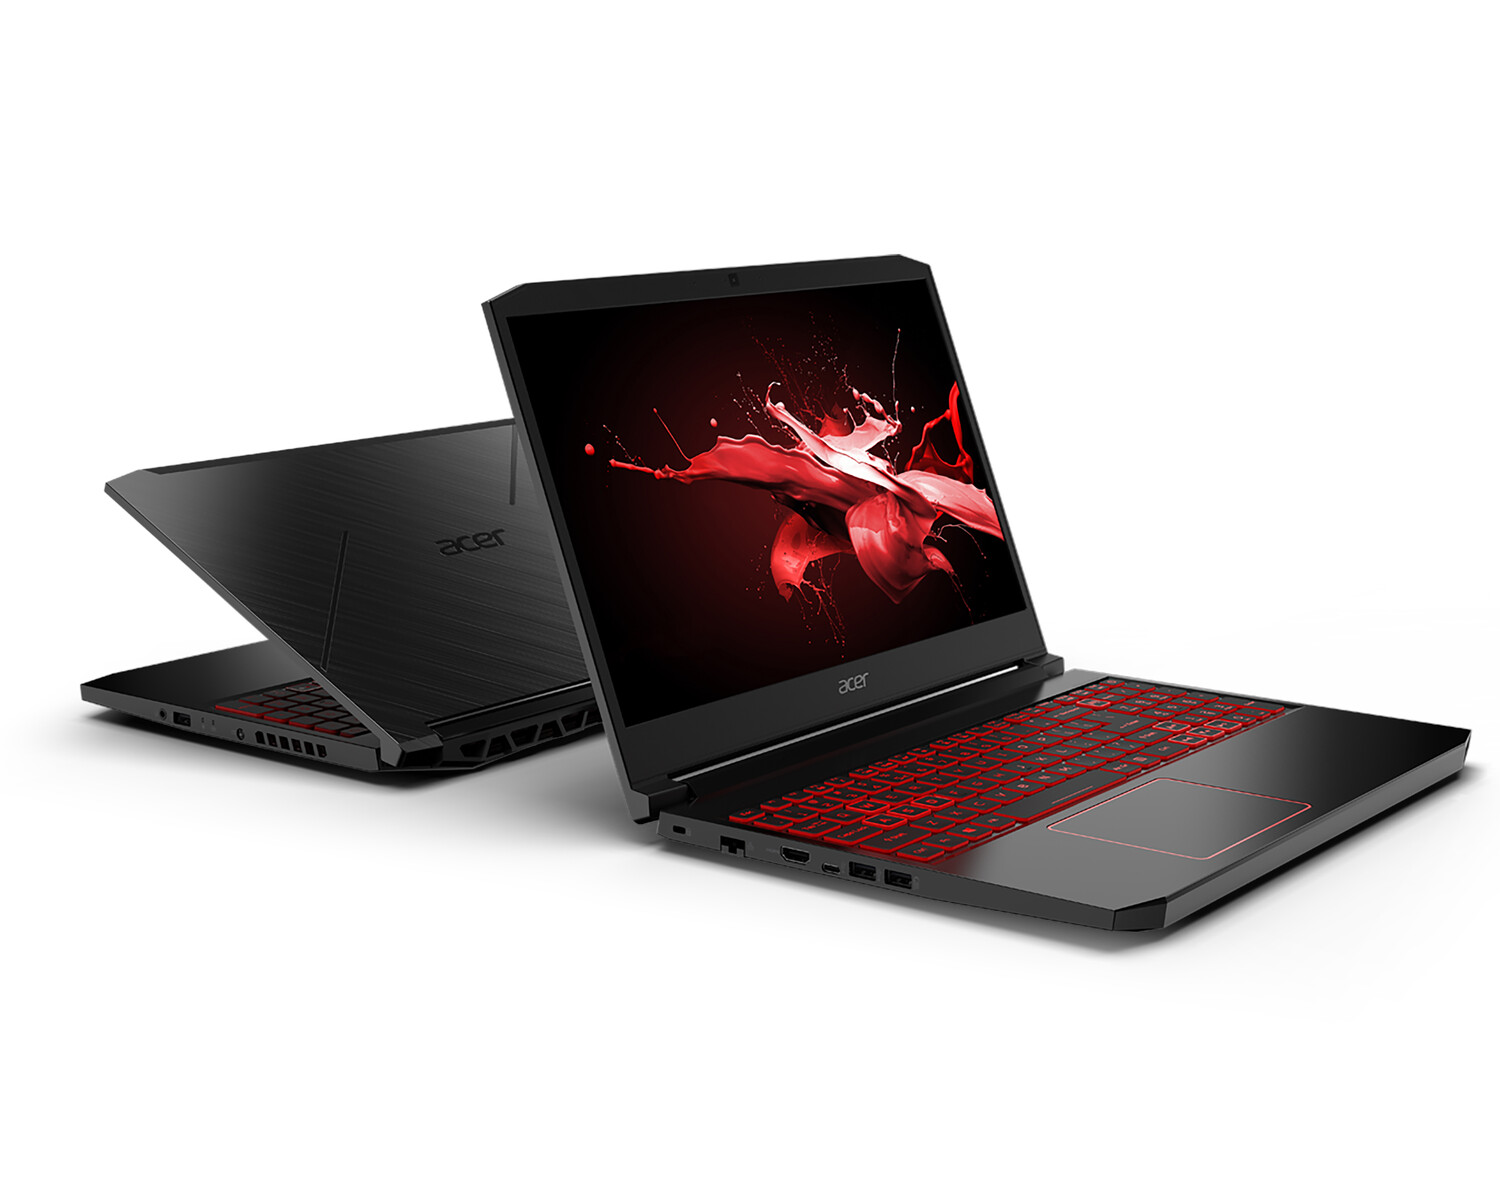 Acer Nitro 7 shipping this month with 